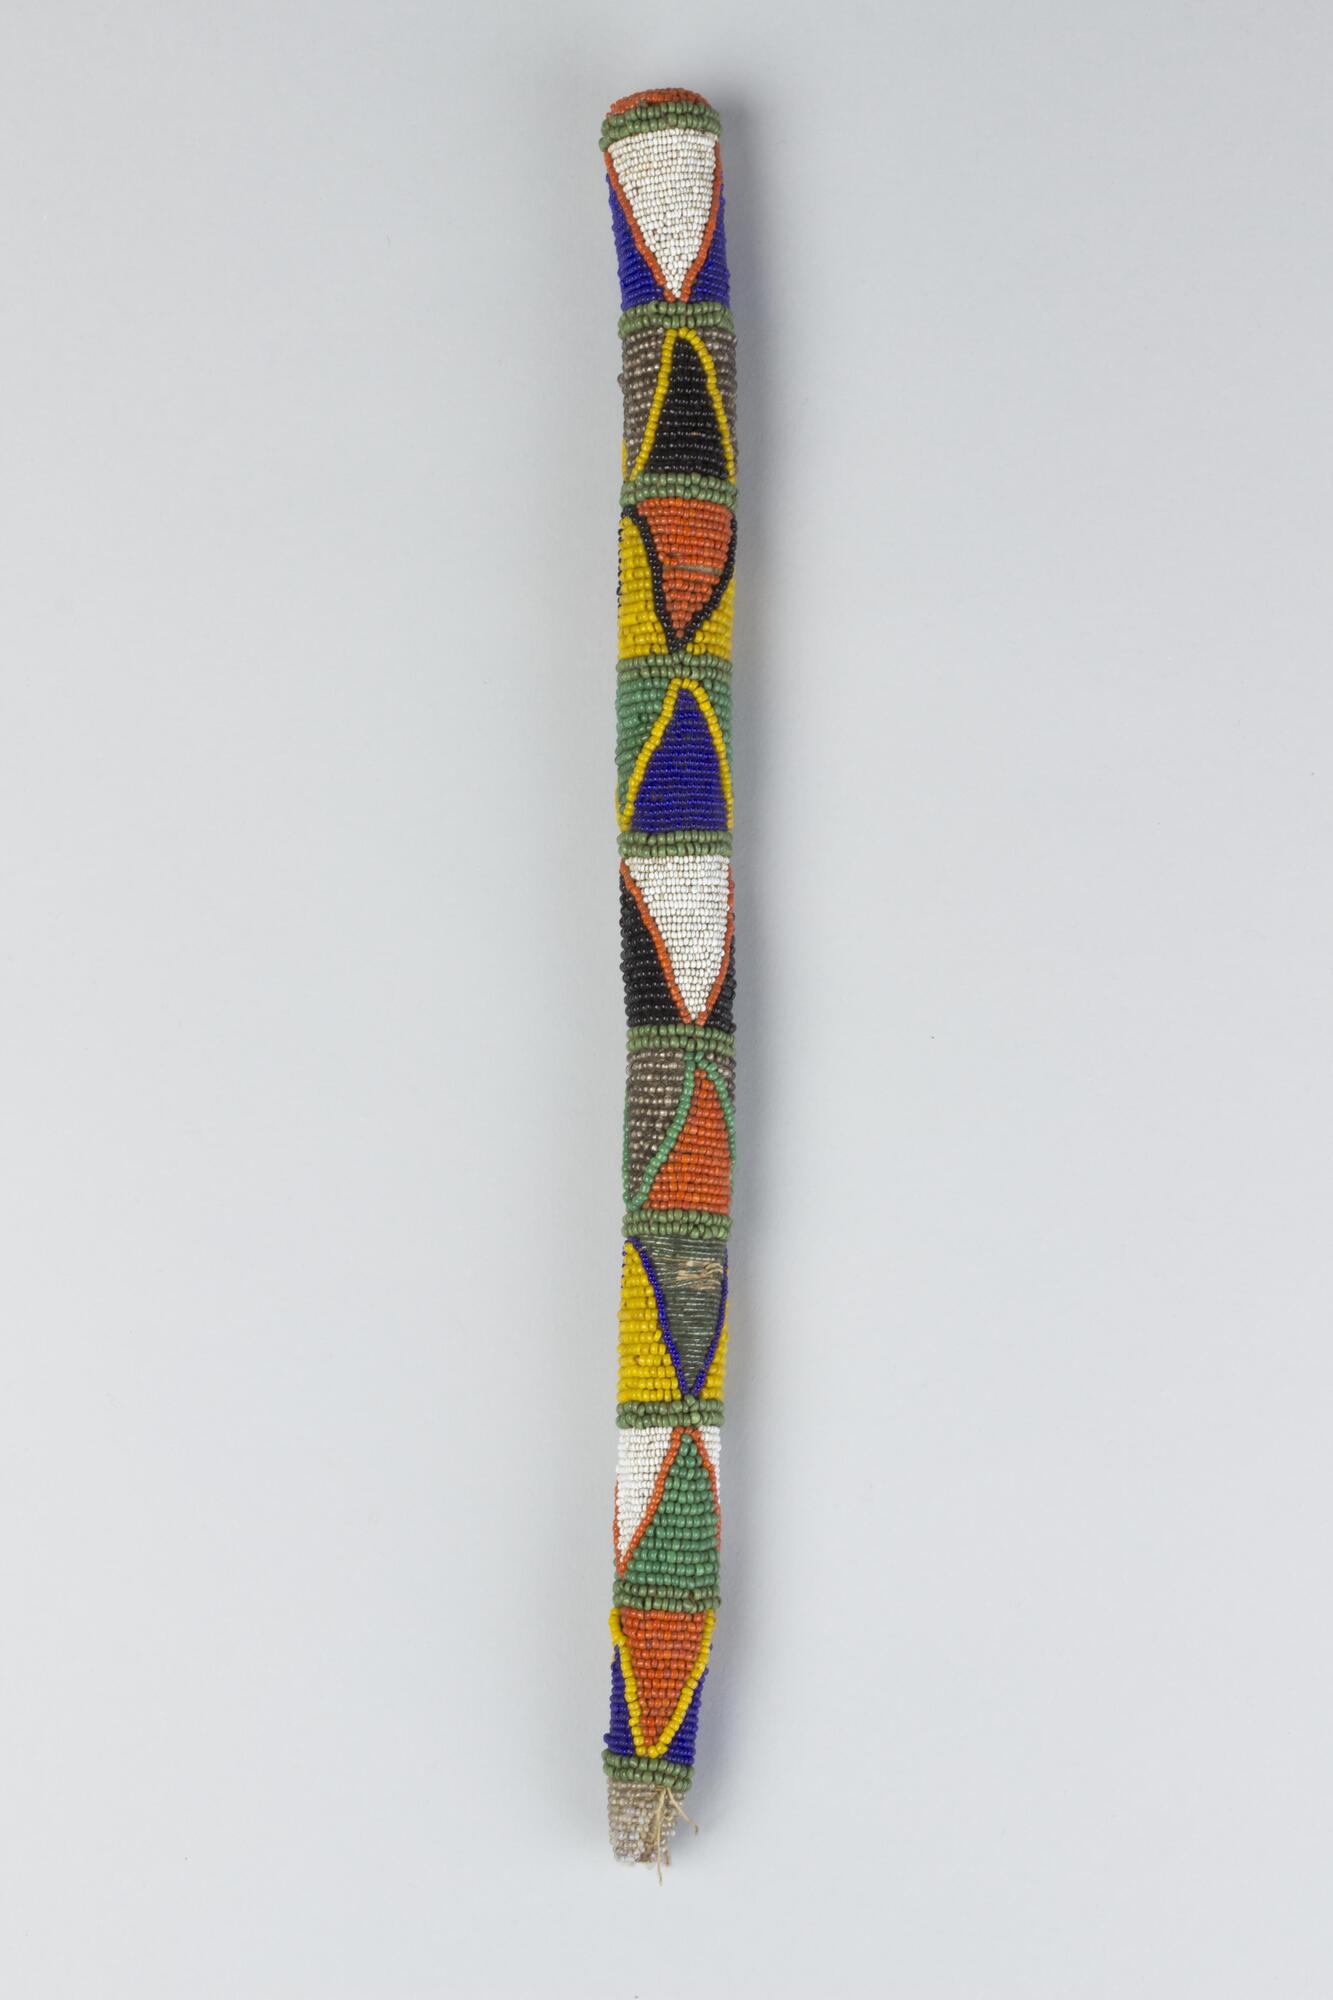 Wooden staff covered with multi-colored beadwork in repeating triangular patterns. 